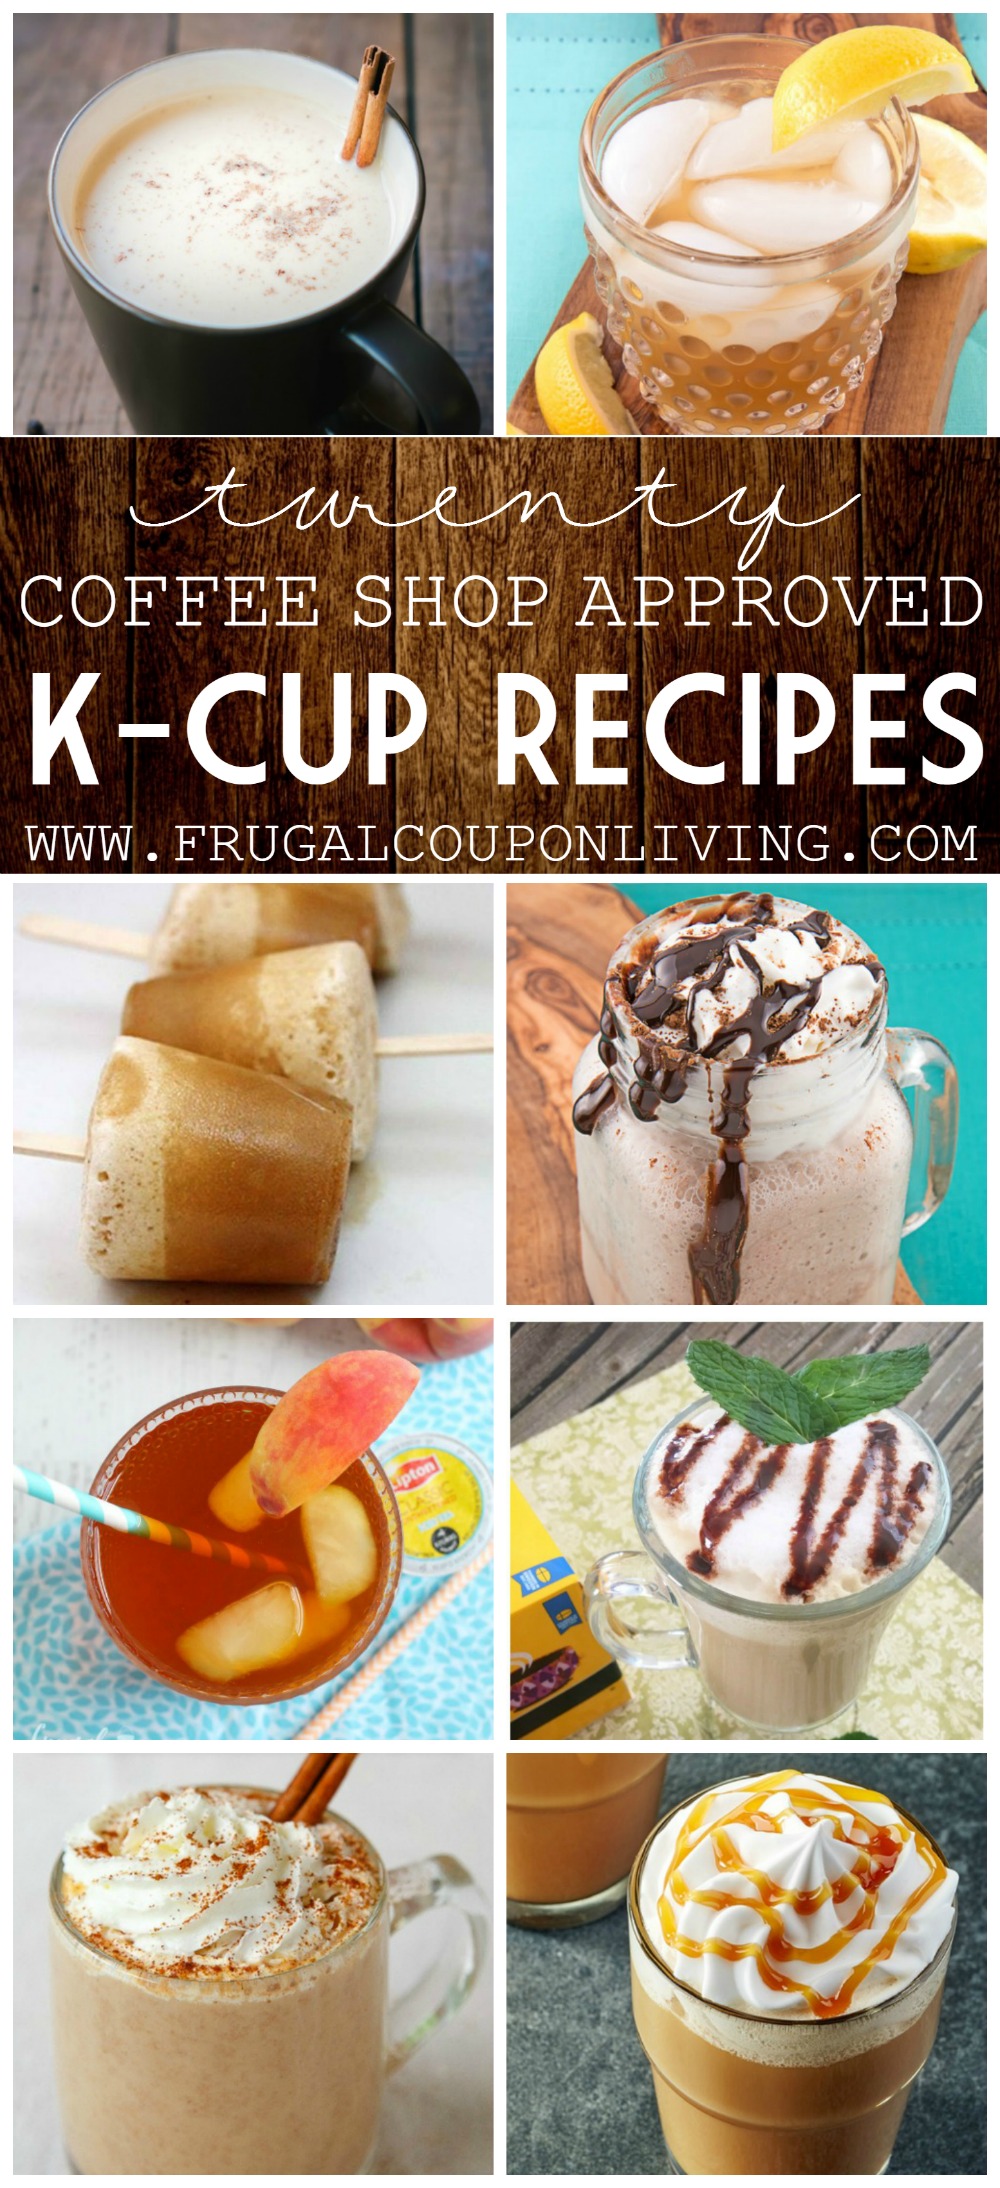 k-Cup-recipes-frugal-coupon-living